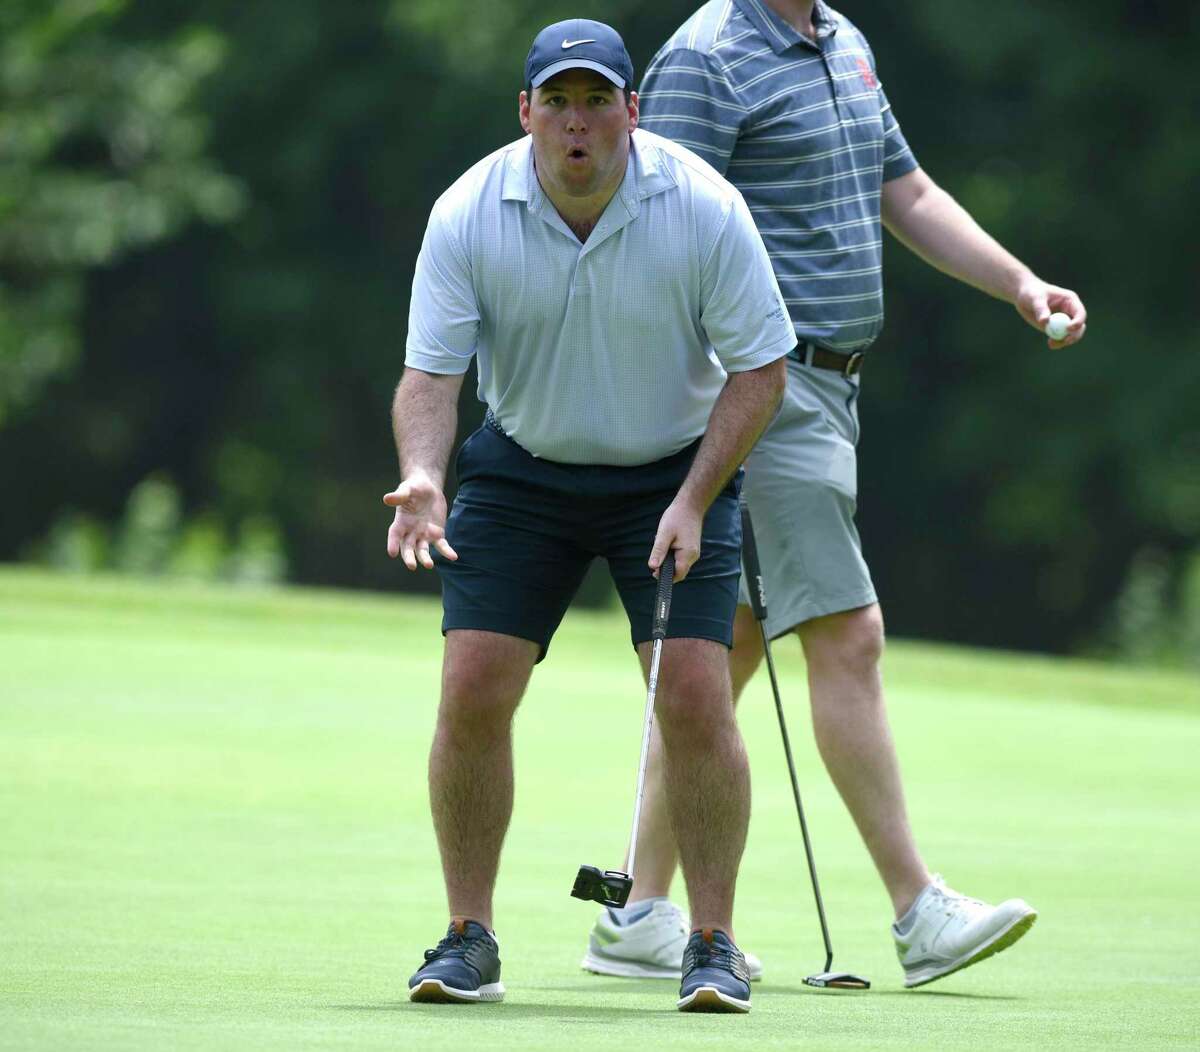 Mark Kelley reacts to a missed putt in the 76th Annual Town Wide Men's Golf Tournament at Griffith E. Harris Golf Course in Greenwich, Conn. Sunday, June 27, 2021.